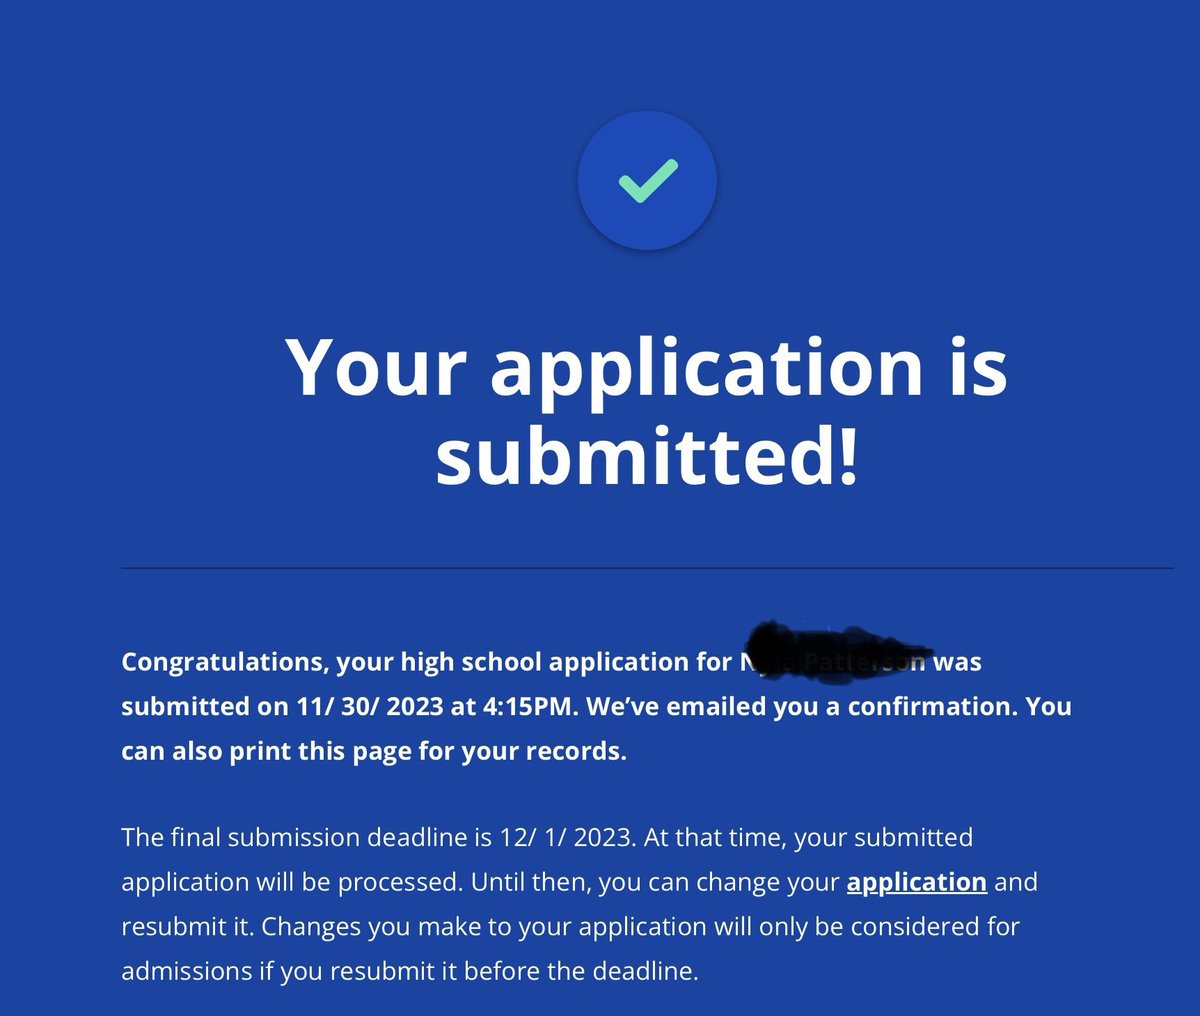 Last time I submitted a NYC public high school application was 12 yrs ago I had anxiety then as I do now having just submitted another app for my youngest Much hasn’t changed & it’s disheartening @NYCEDC